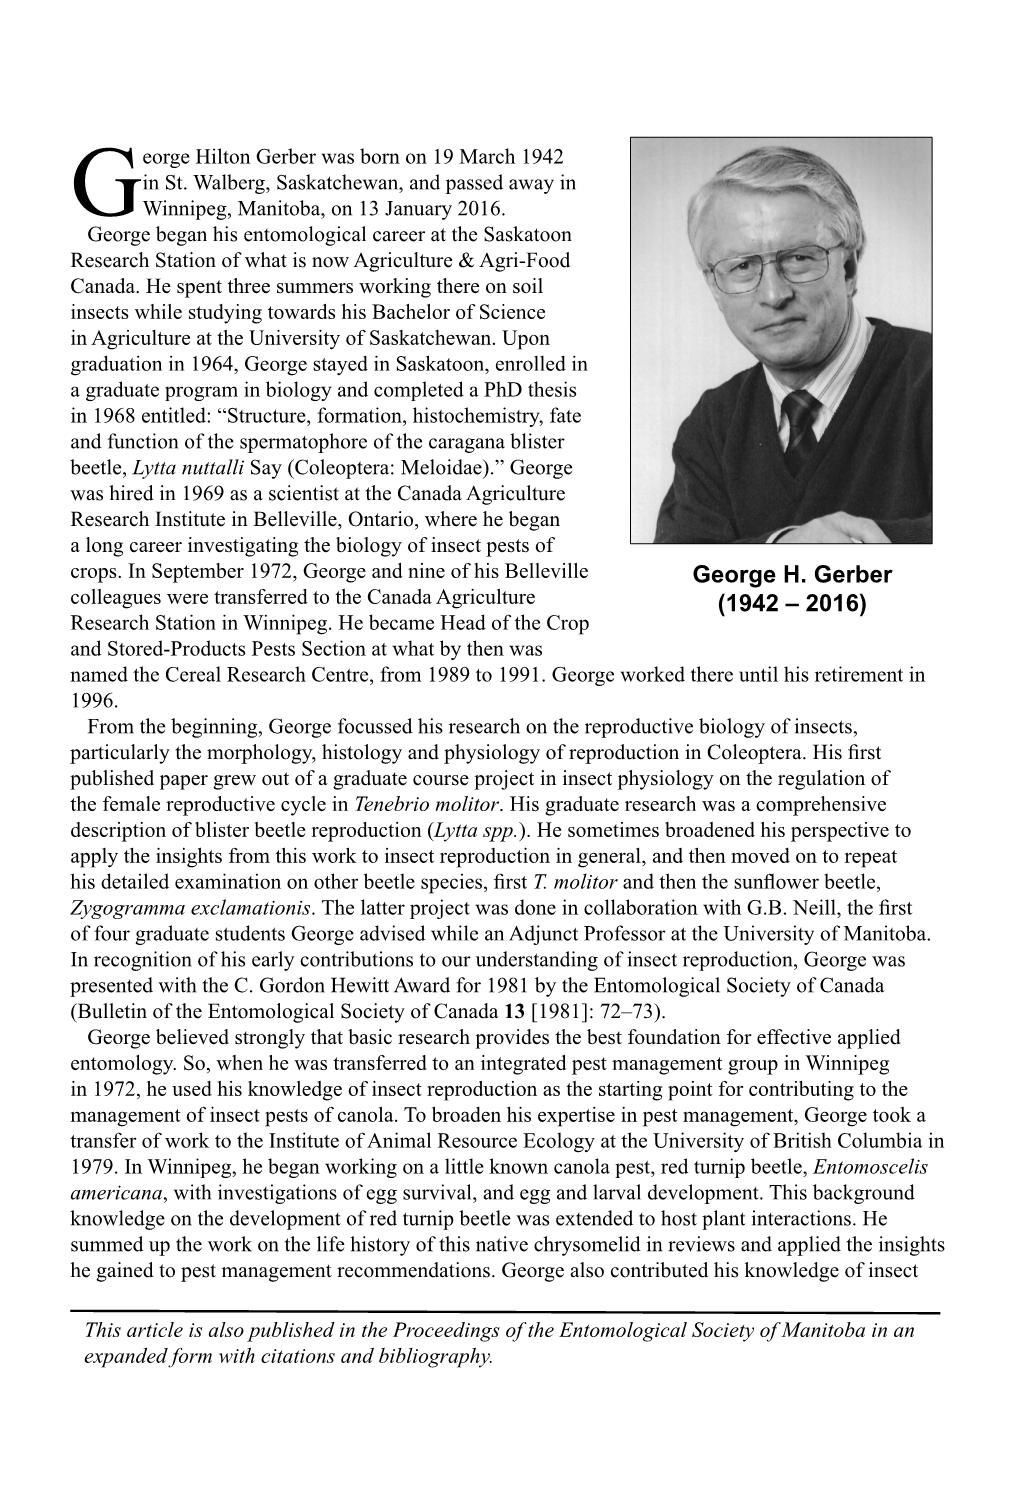 George H. Gerber Colleagues Were Transferred to the Canada Agriculture (1942 – 2016) Research Station in Winnipeg